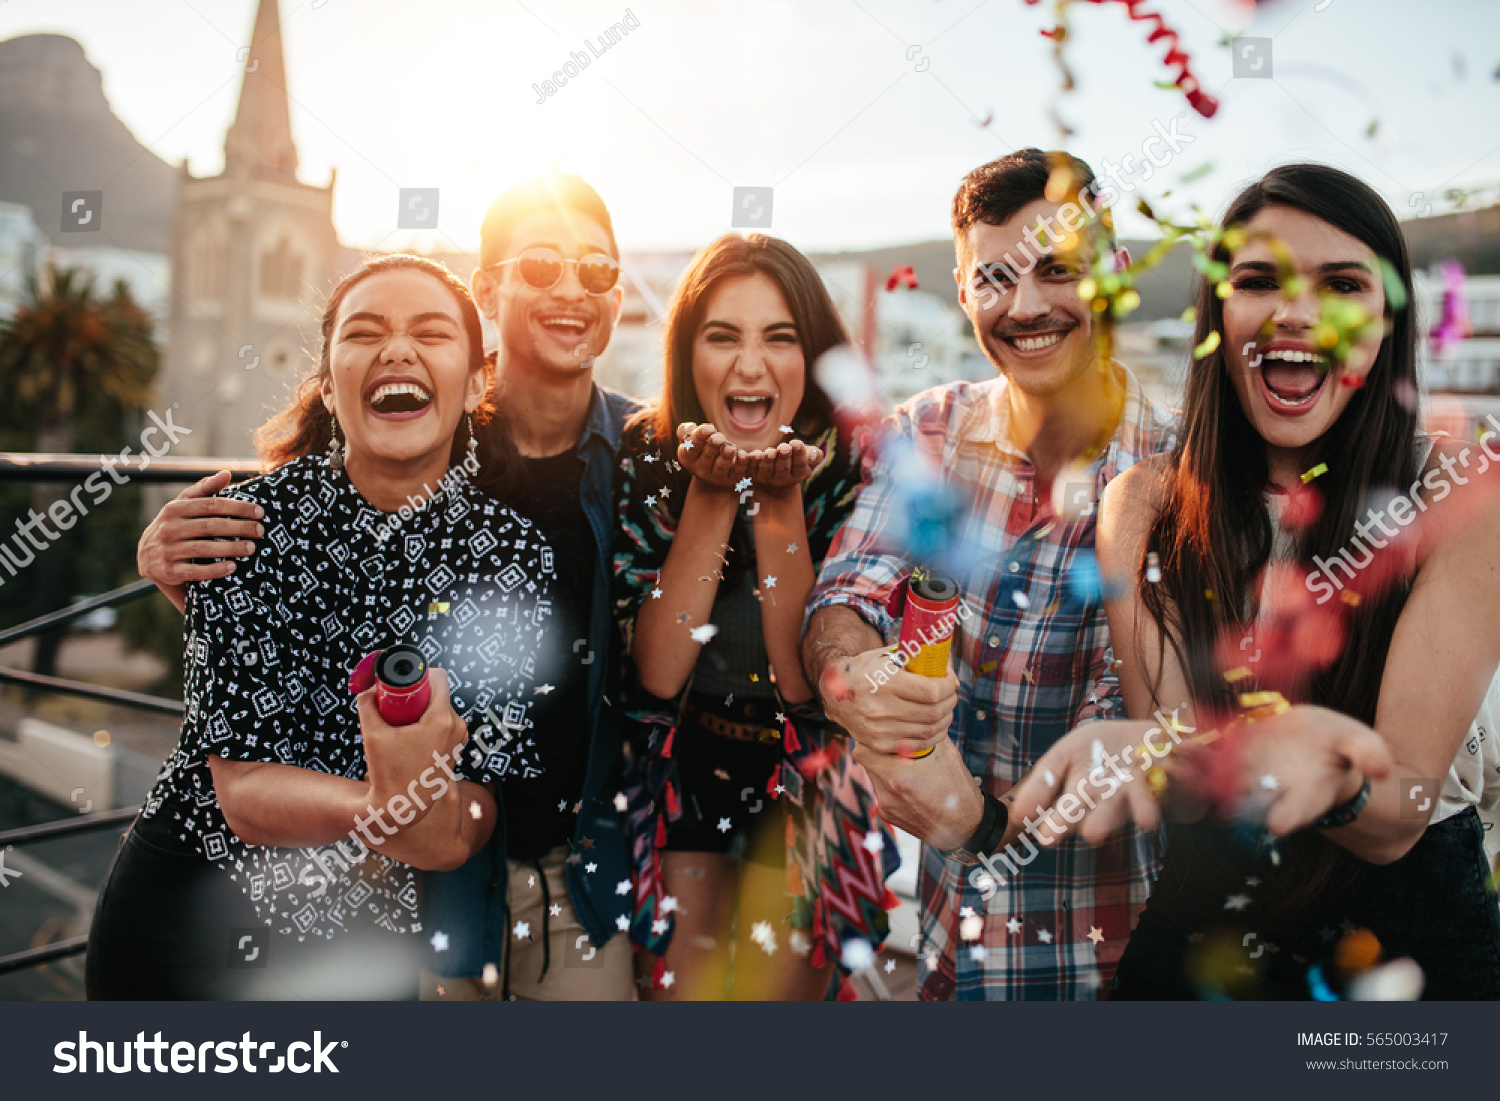 Group of friends enjoying party and throwing confetti. Friends having fun at rooftop party.